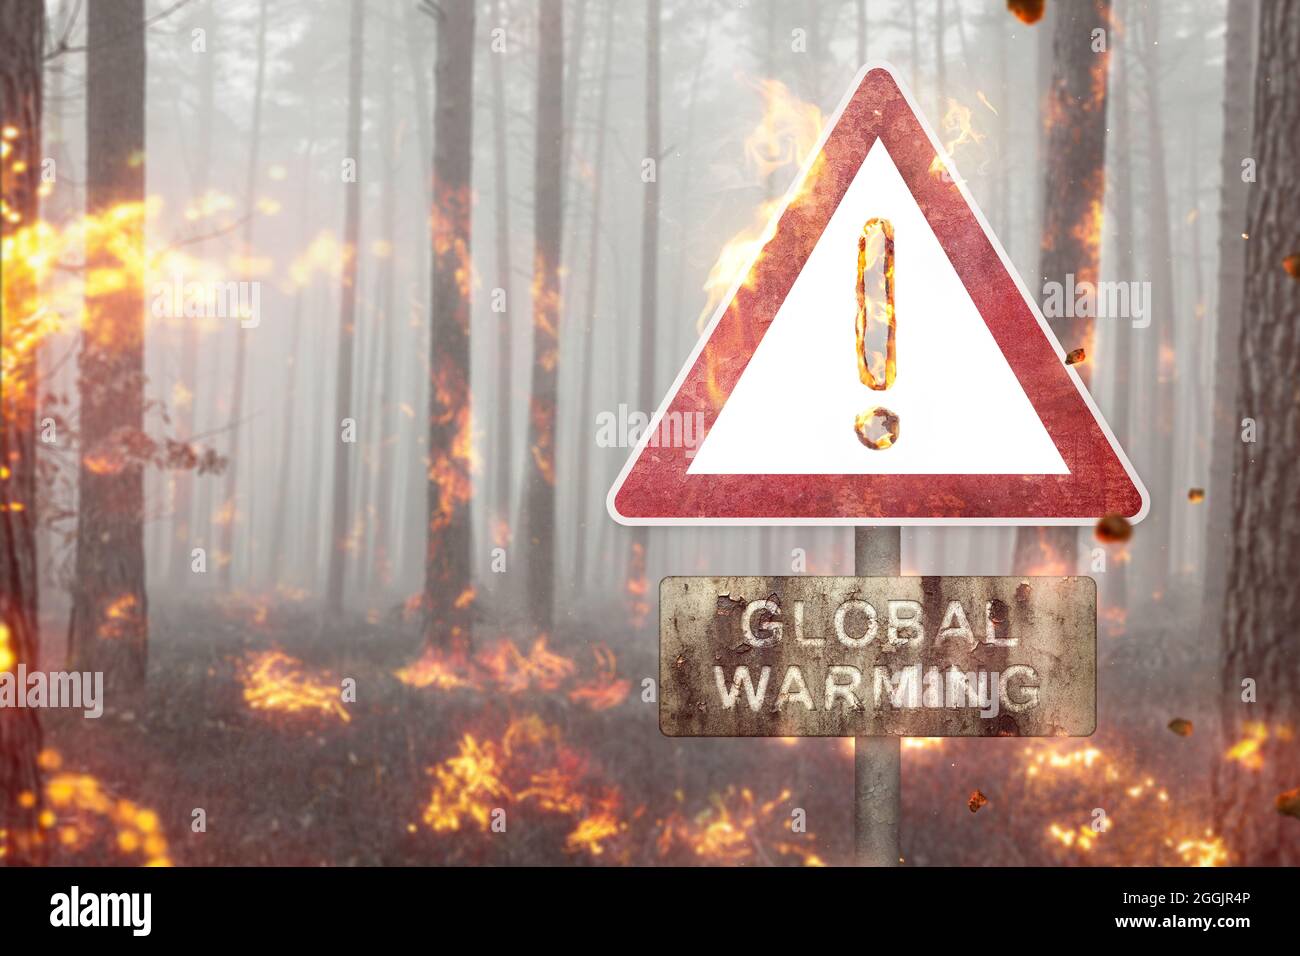 Global Warming warning sign in a burning forest Stock Photo